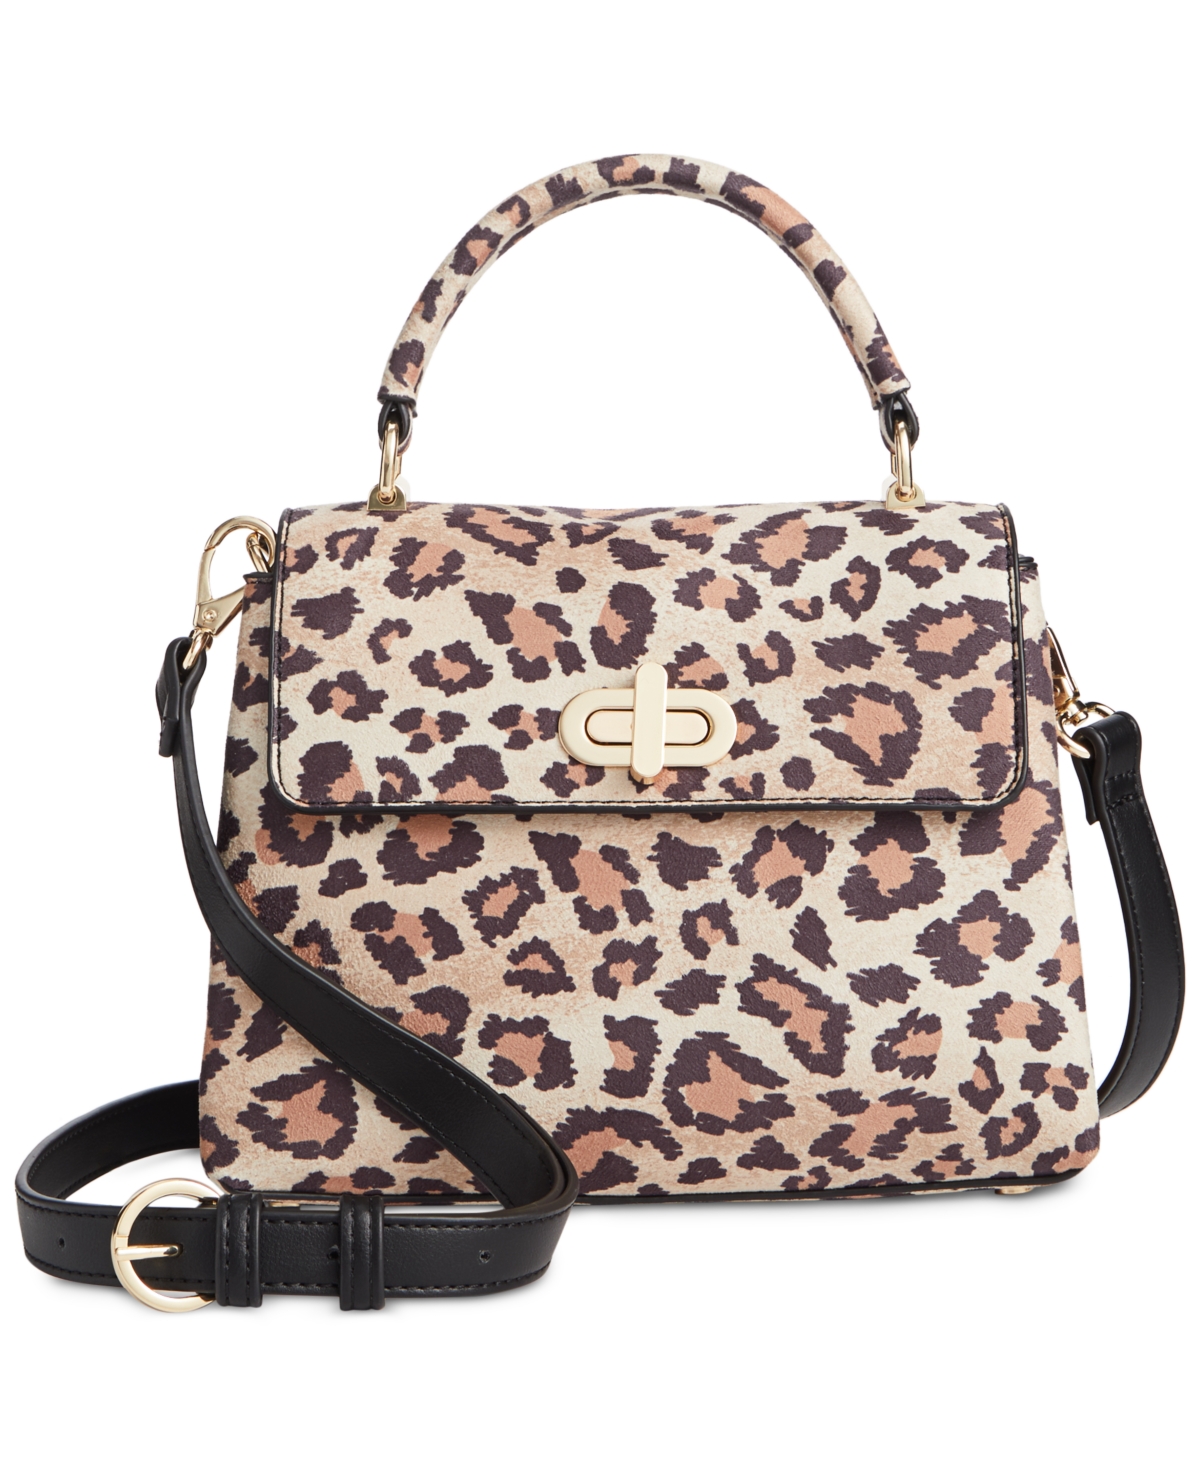 Tandii Small Top Handle Crossbody, Created for Macy's - Leopard